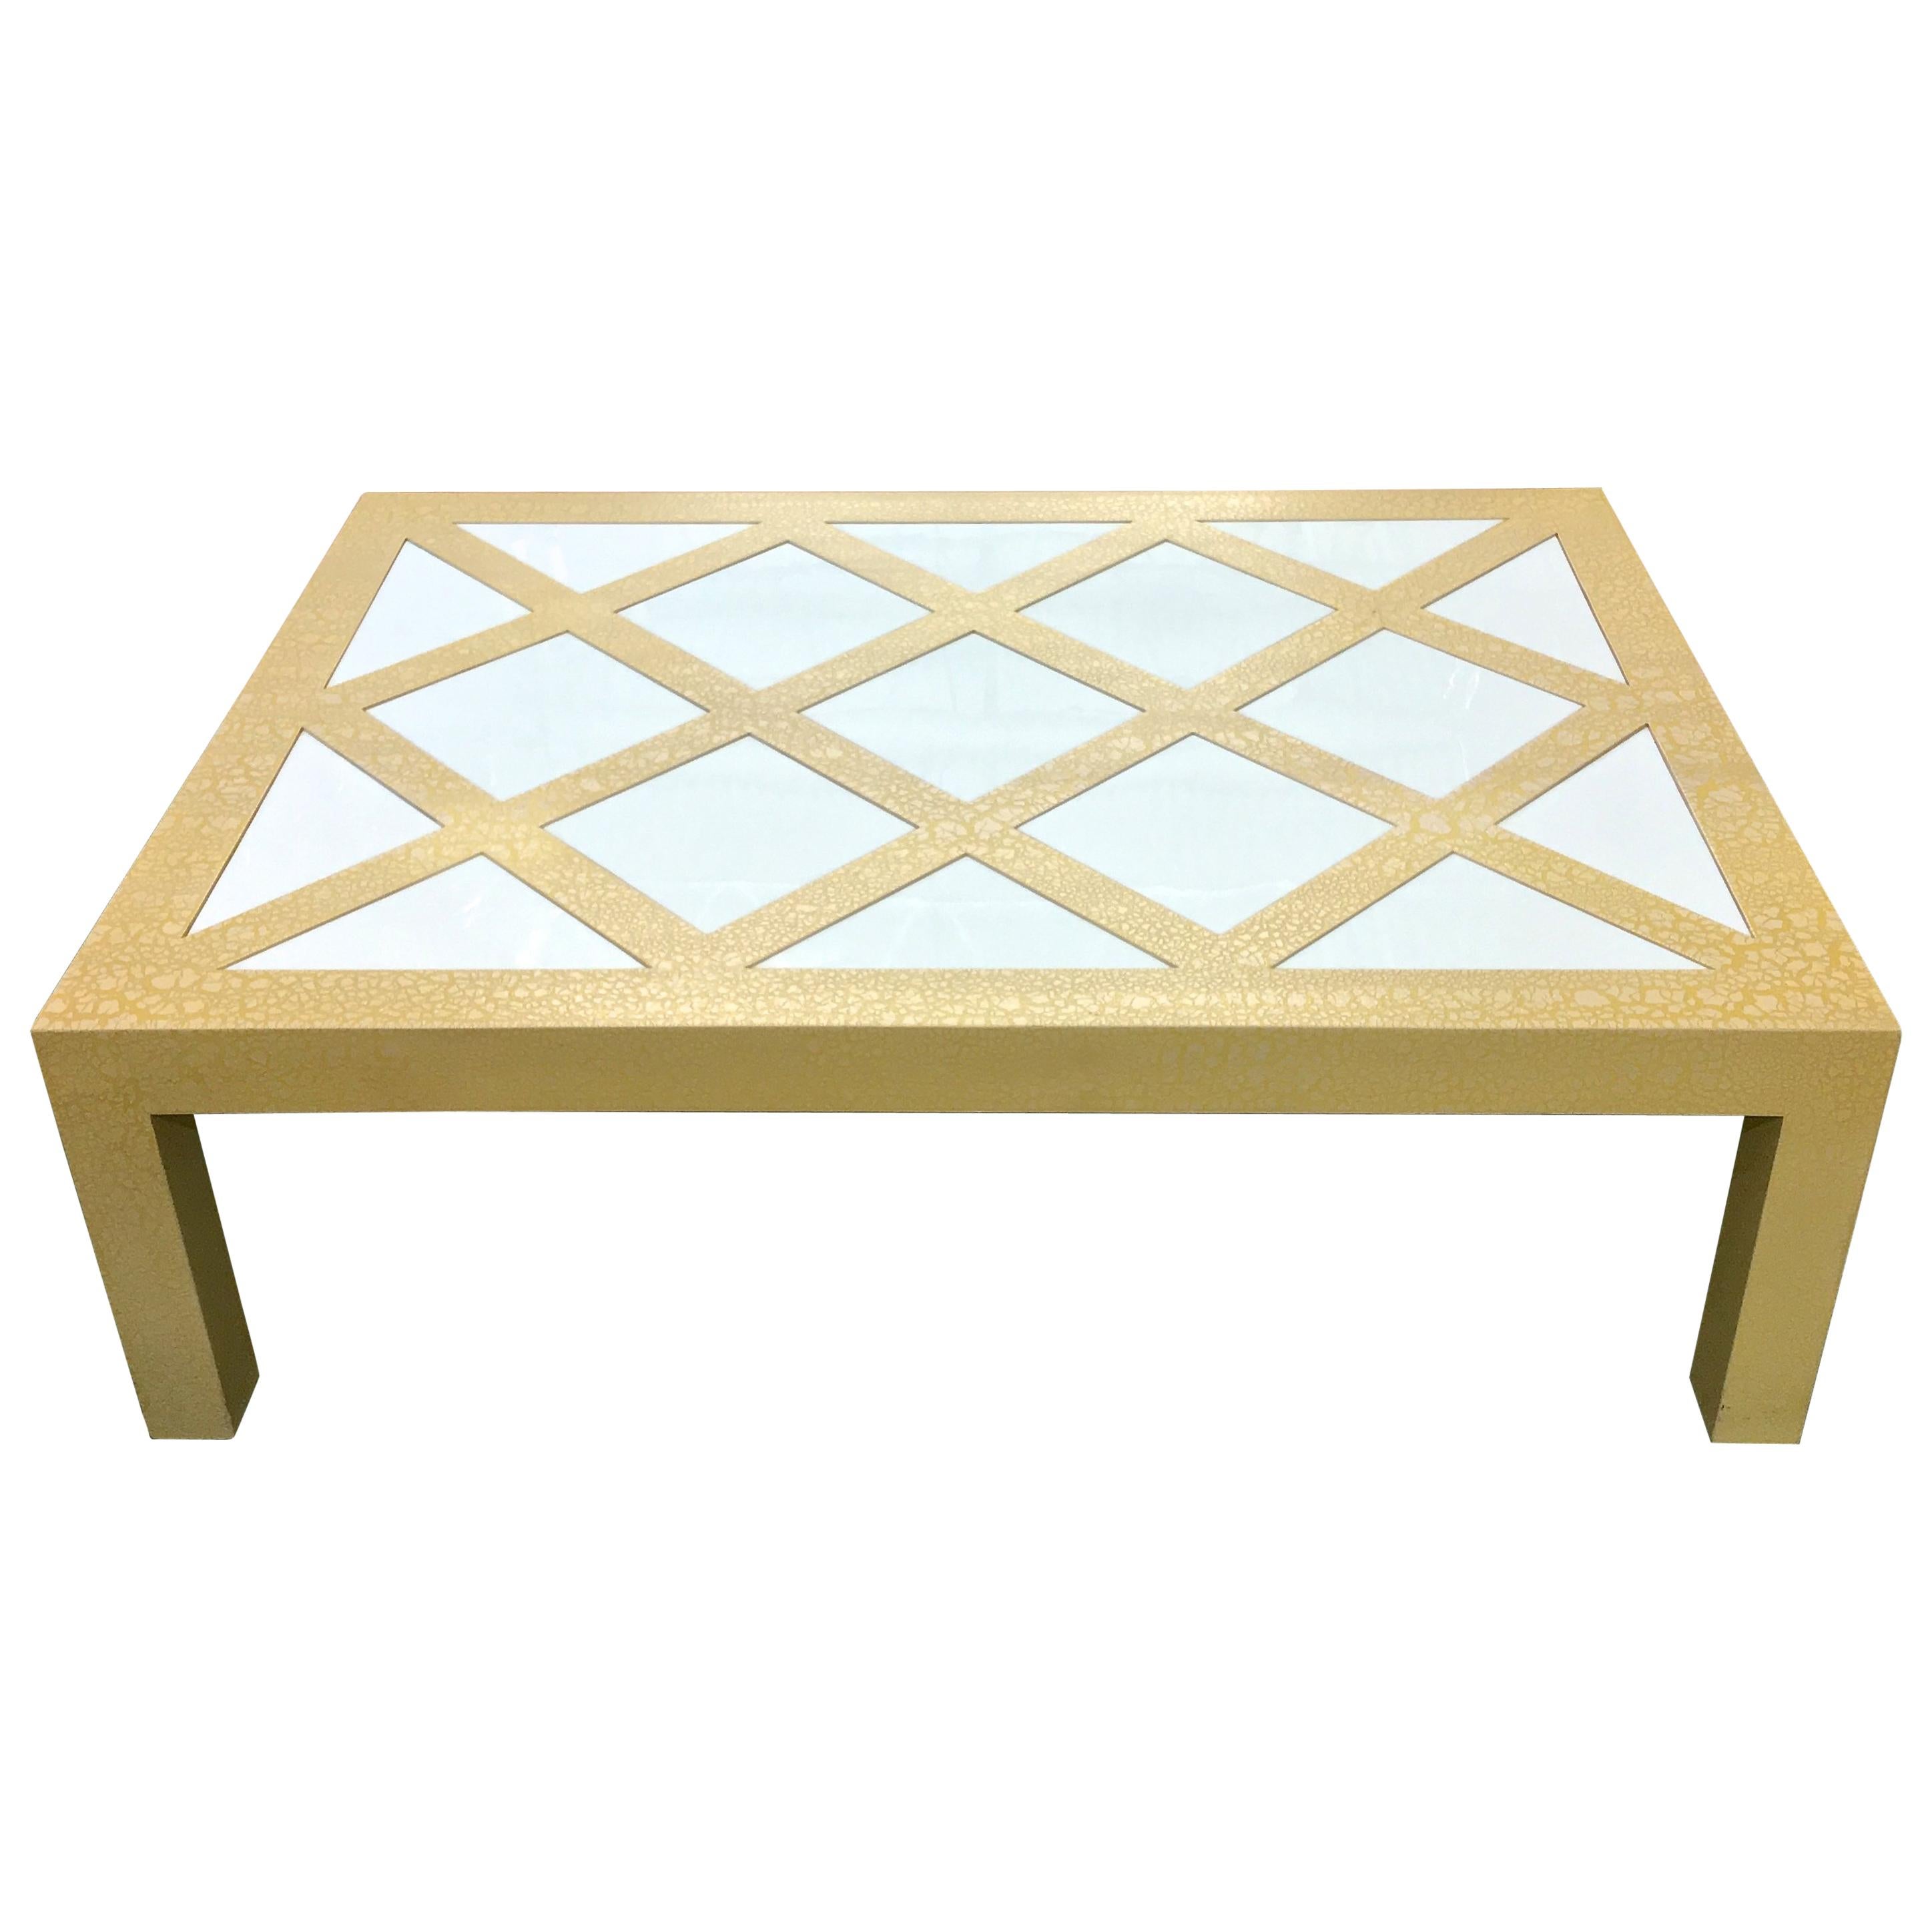 Milo Baughman Style Parsons Cocktail Table with Yellow Crackle and White Glass